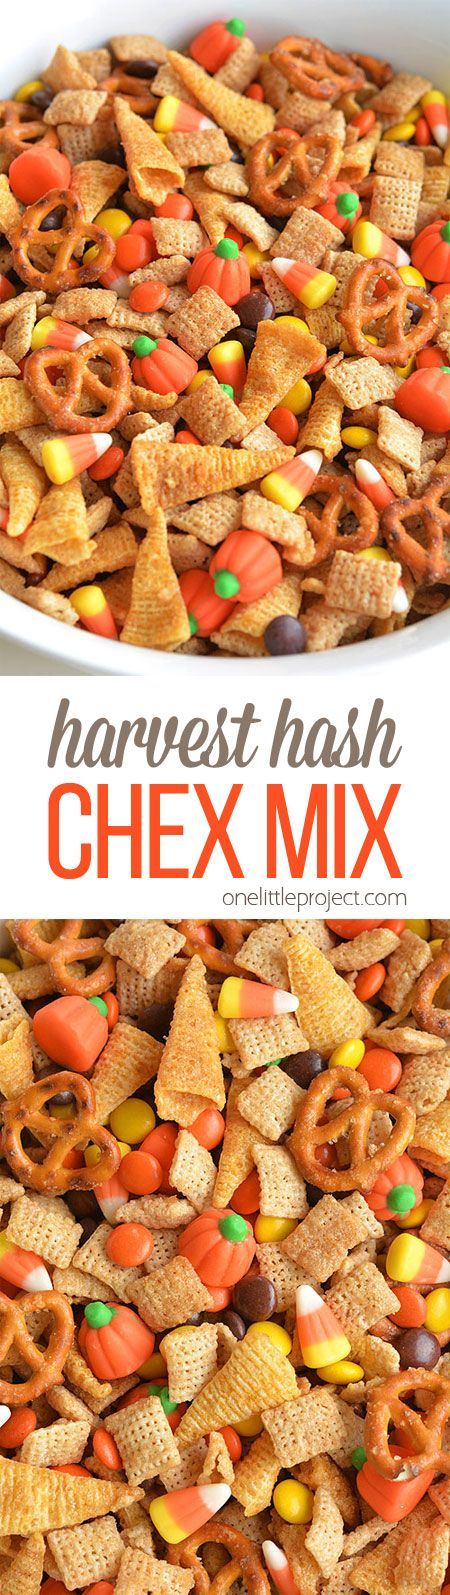 This Halloween harvest hash Chex mix is the PERFECT combination of sweet and salty